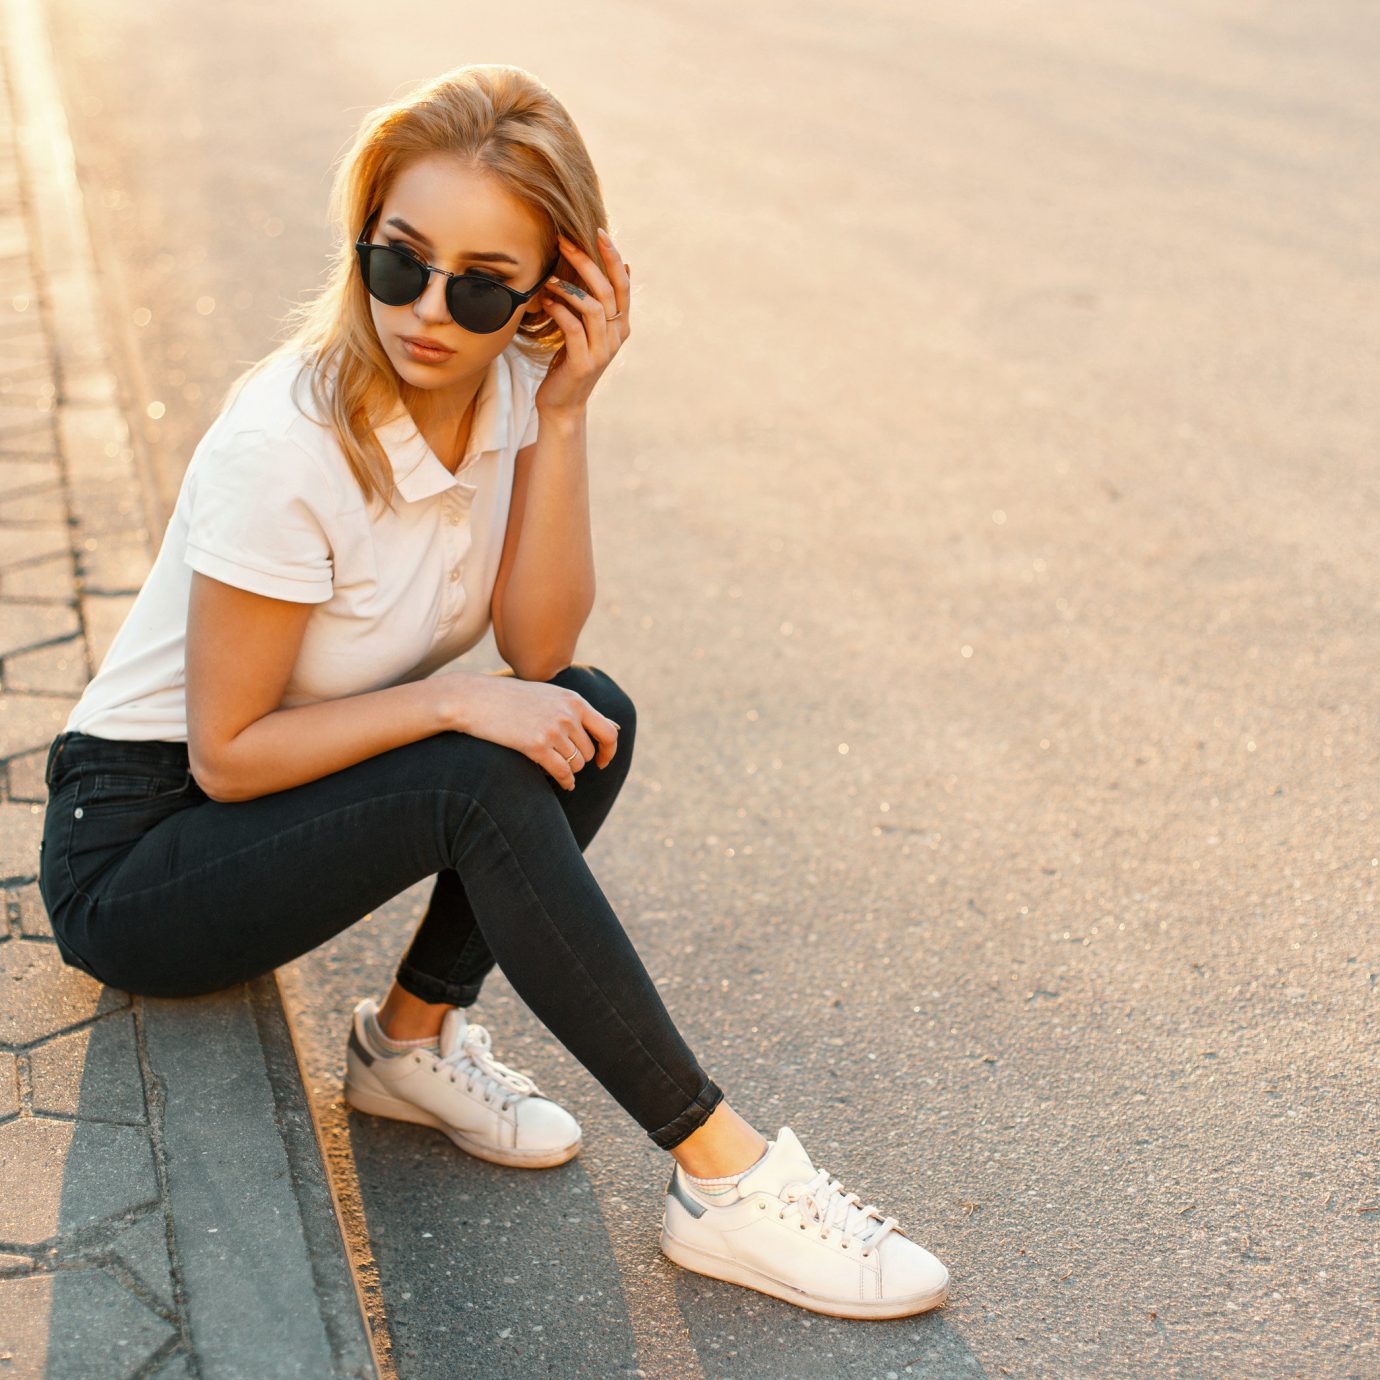 Packing Tips Style + Design Travel Shop ground outdoor person footwear clothing eyewear jeans shoe sunglasses shoulder vision care young girl sitting joint denim glasses trousers neck health & beauty shorts pattern leggings sleeve way